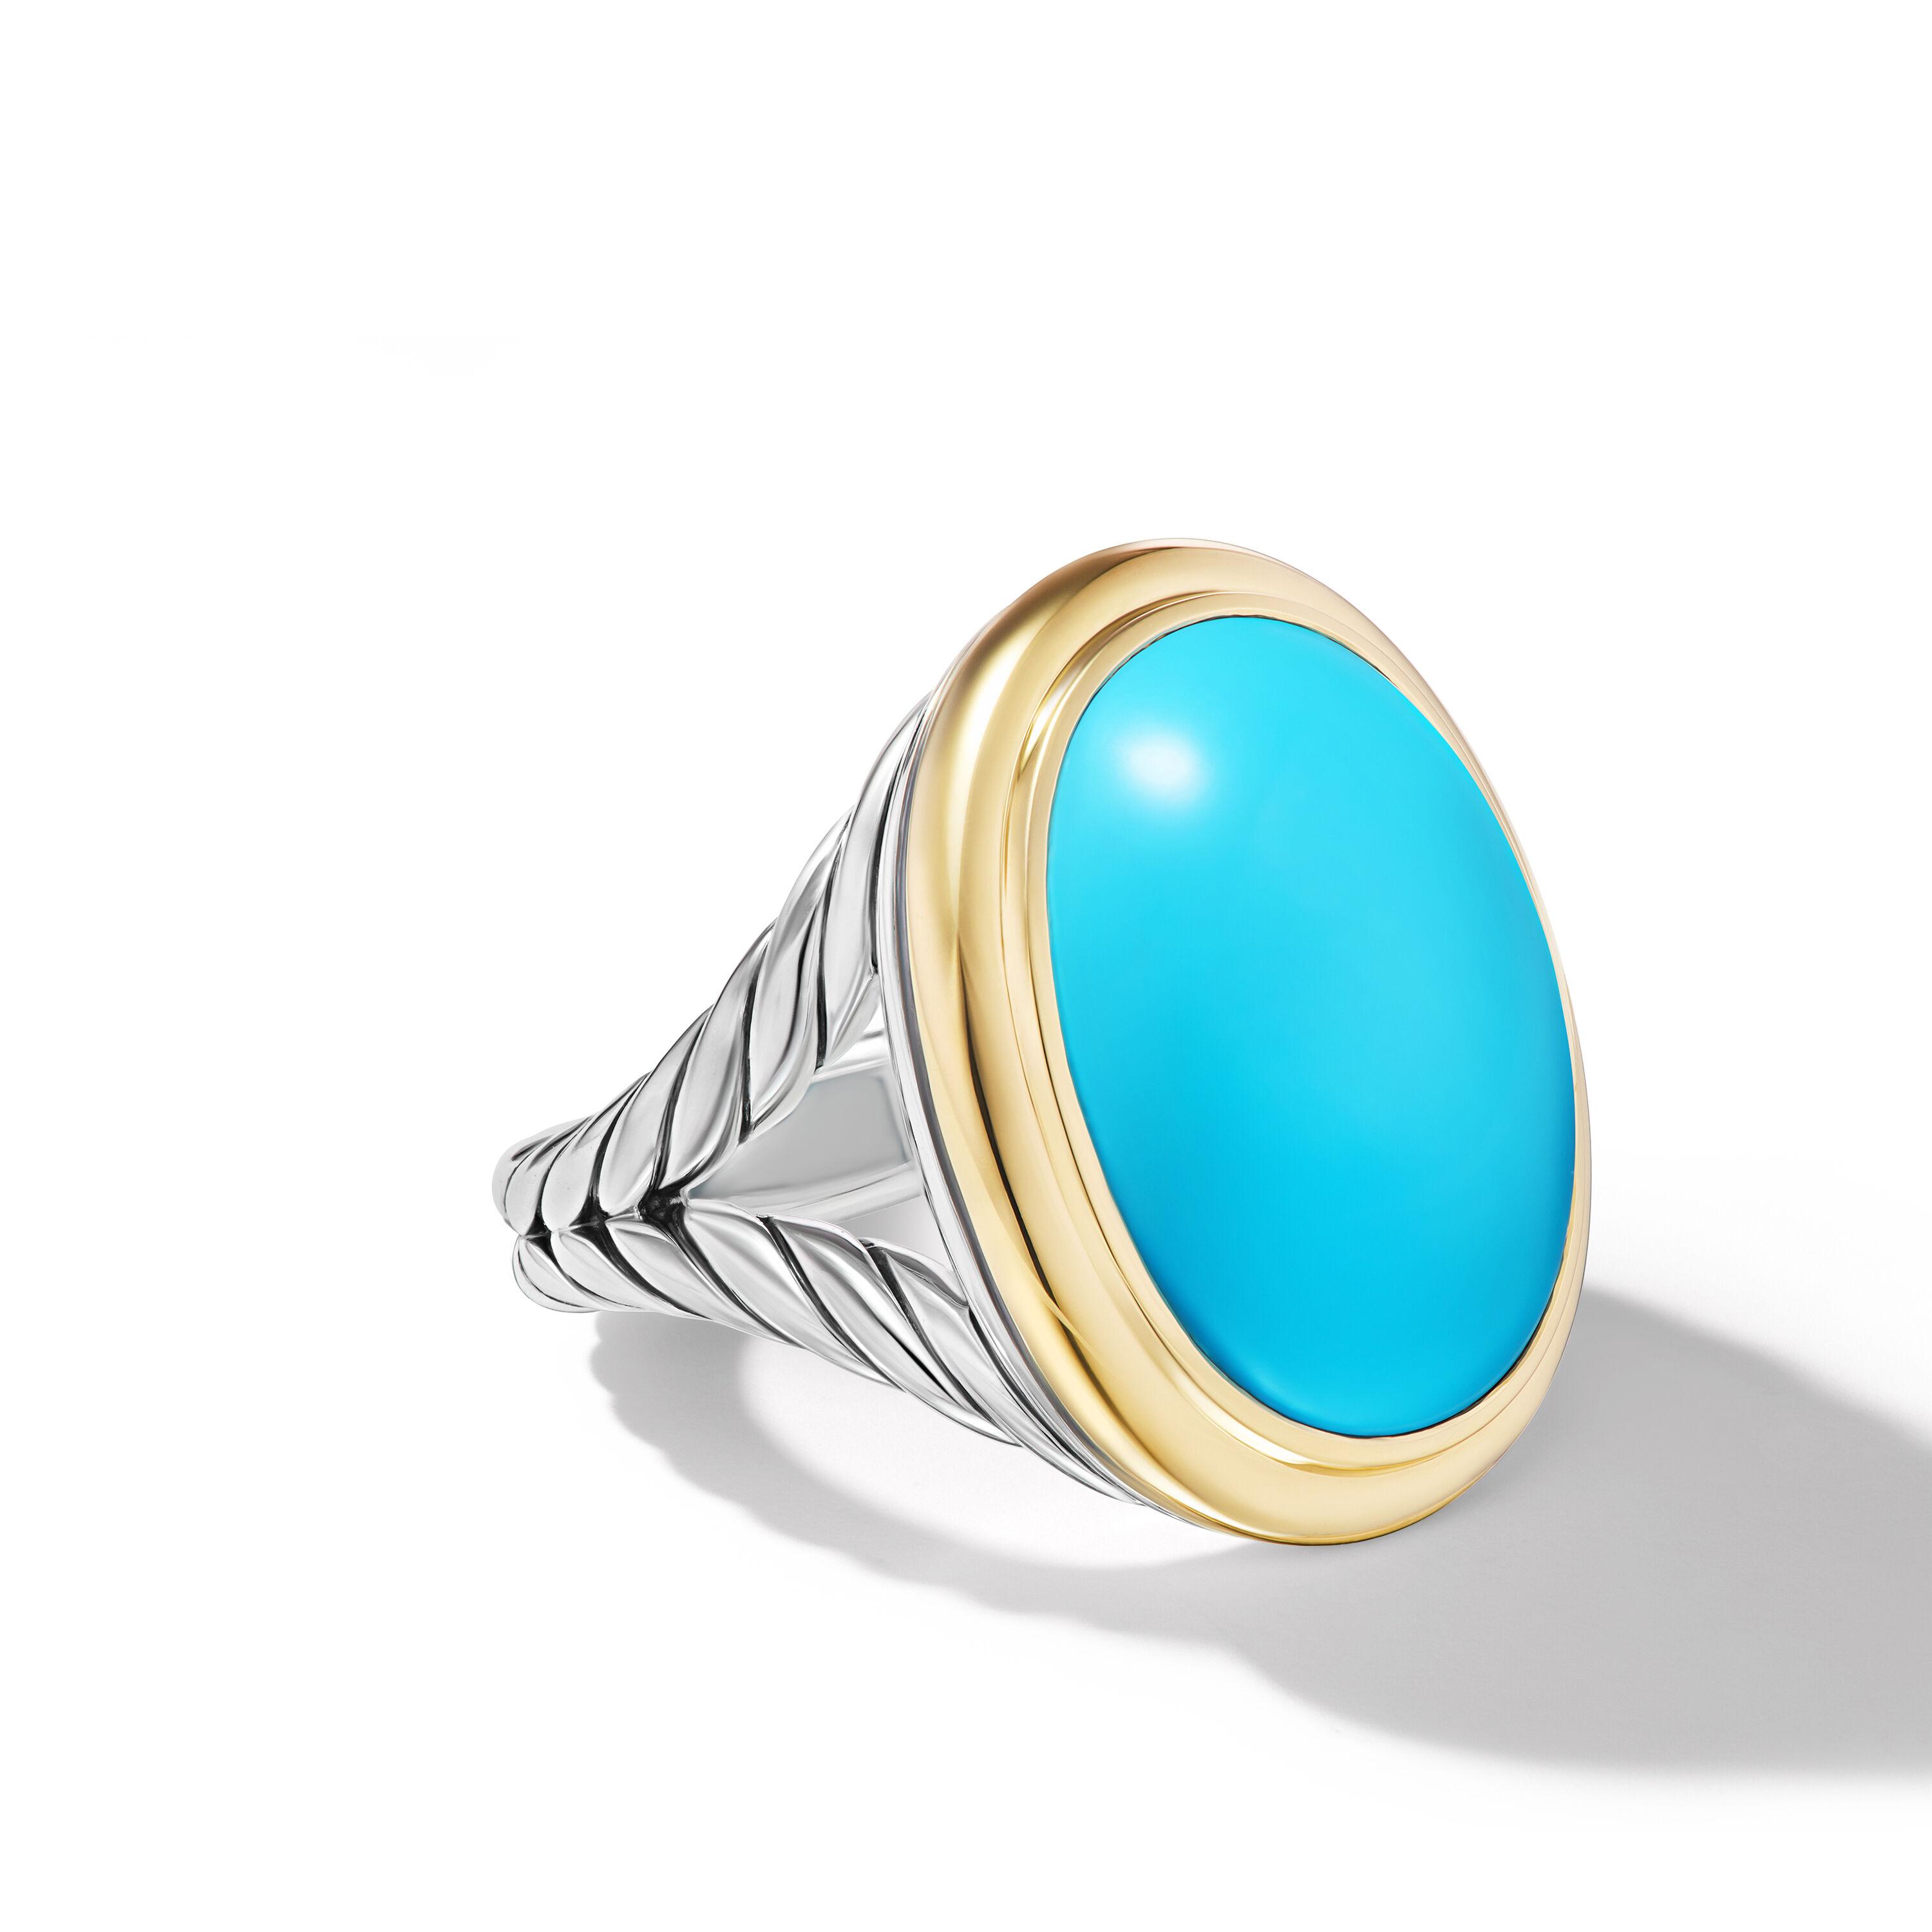 David Yurman Albion Oval Ring in Sterling Silver with 18K Yellow Gold and Turquoise 0